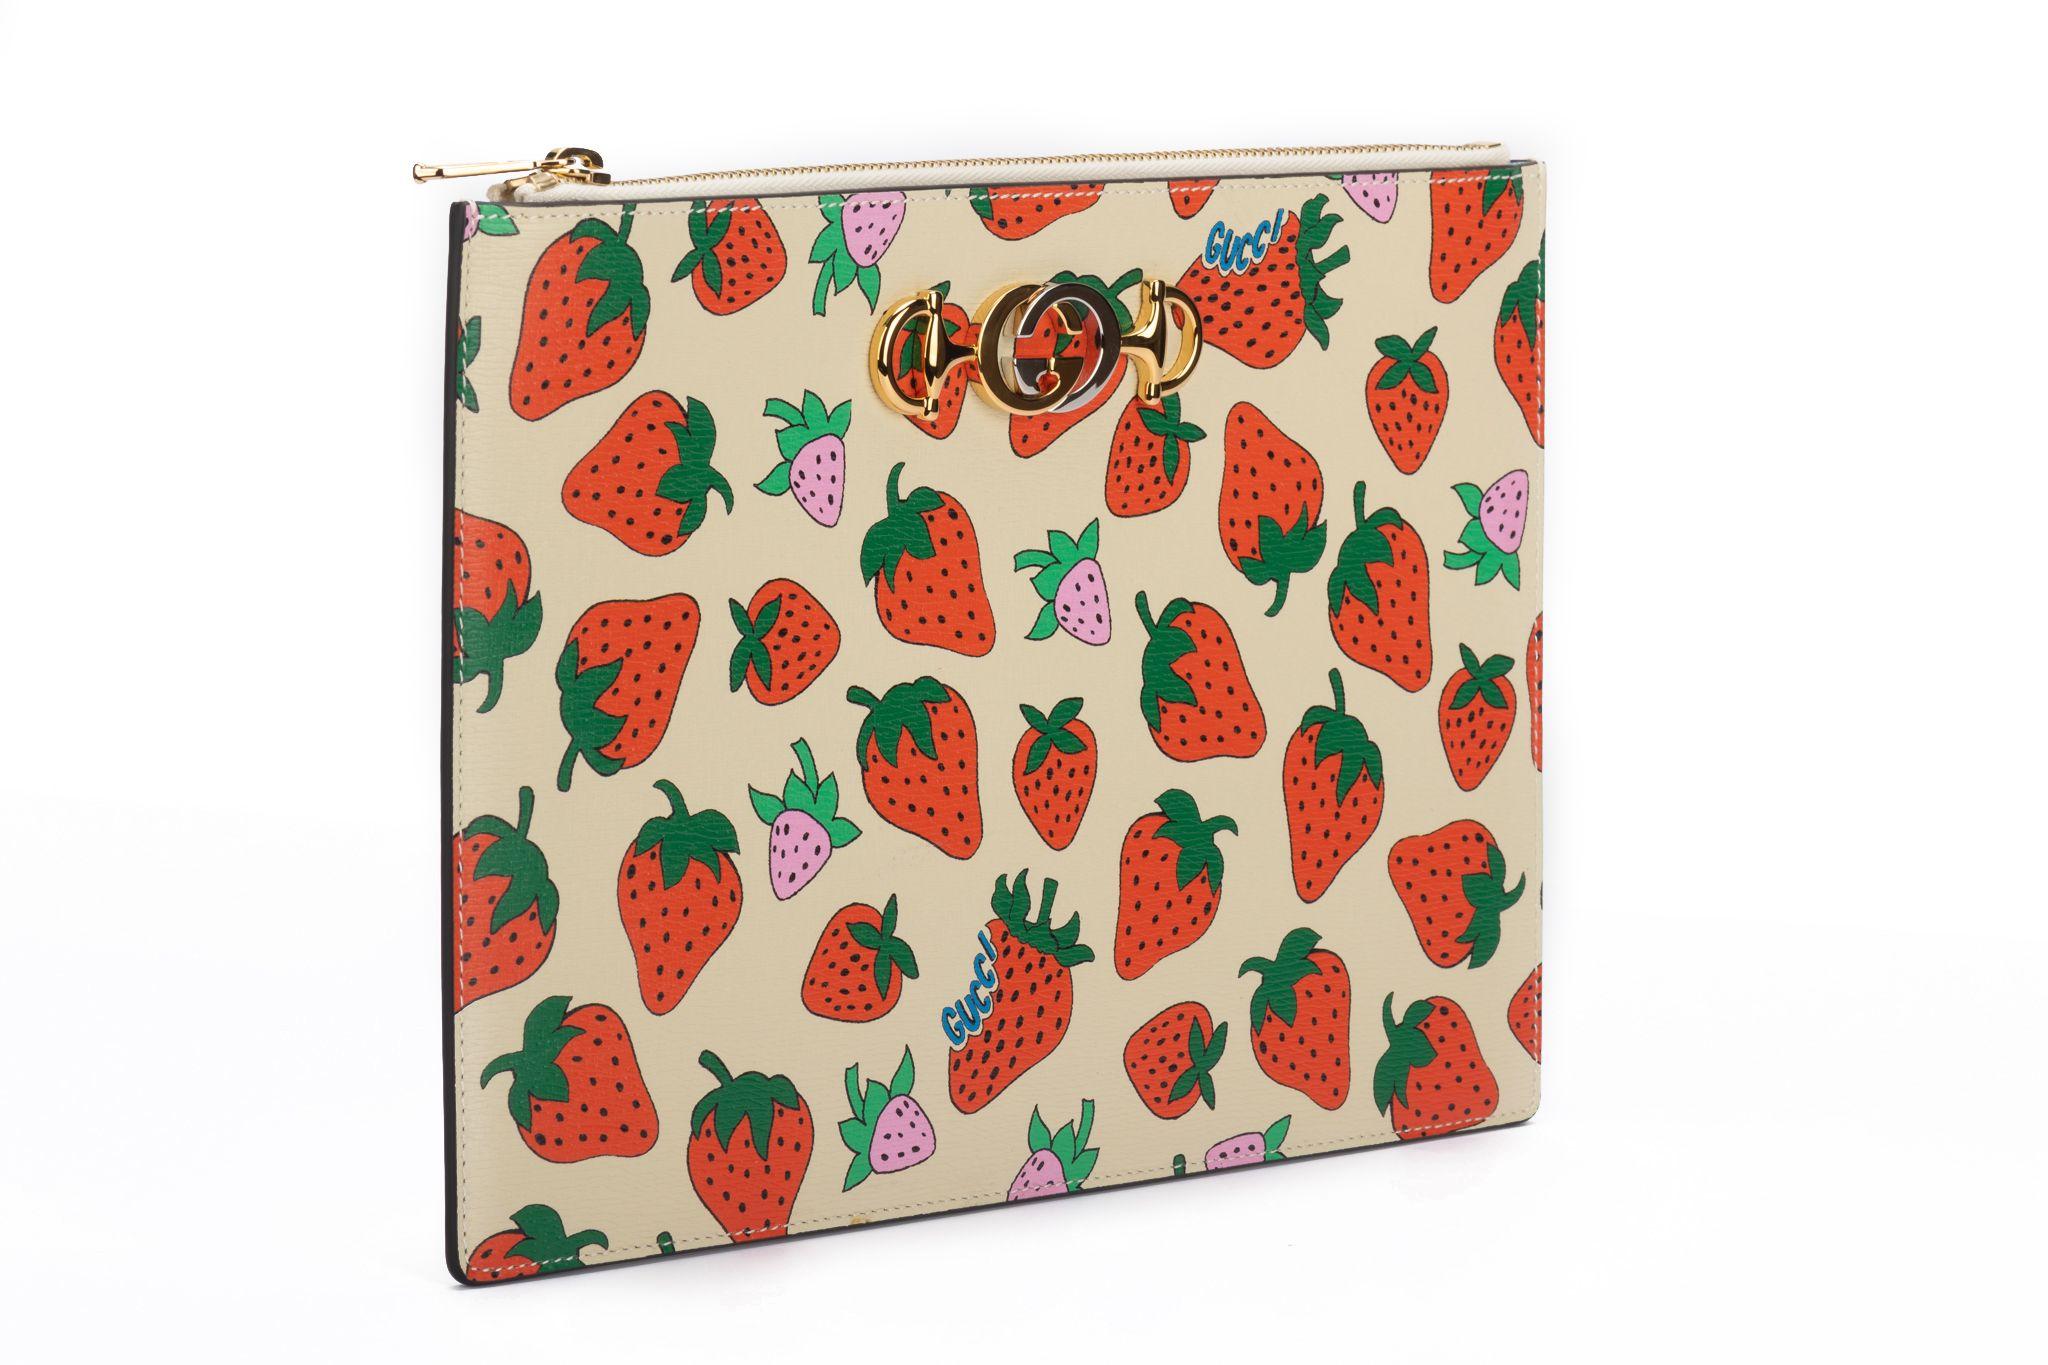 Gucci NIB limited edition strawberry clutch. Cream leather, two tone hardware. Comes with booklet, original dust cover and box.